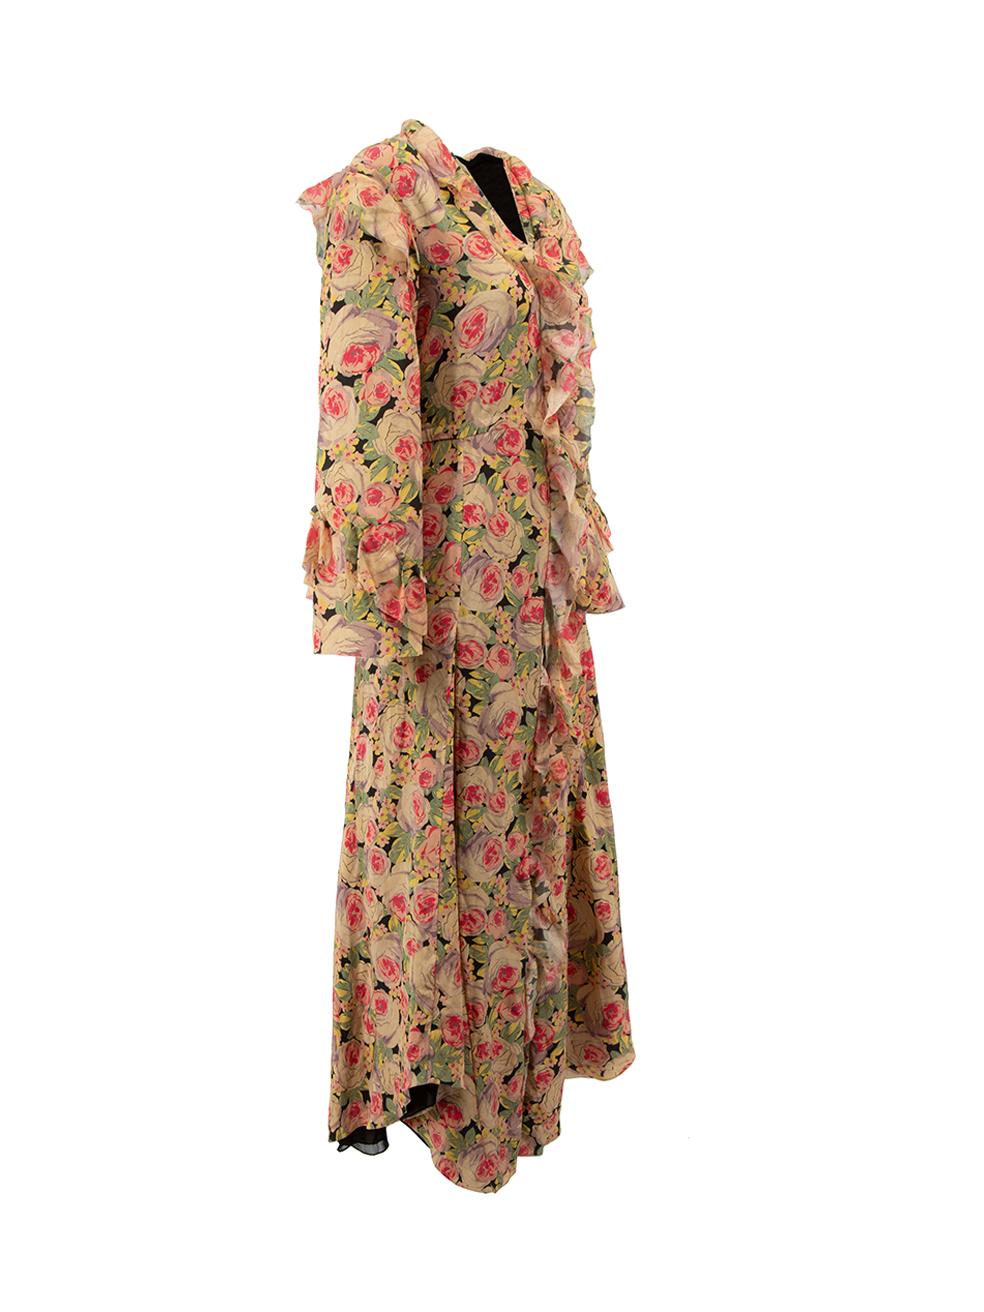 CONDITION is Good. Minor wear to dress is evident. Light wear to garment with single missing button at centre front on this used Vilshenko designer resale item.
  
  Details
  Multicolour
  Synthetic
  Maxi dress
  Floral print pattern
  Ruffles